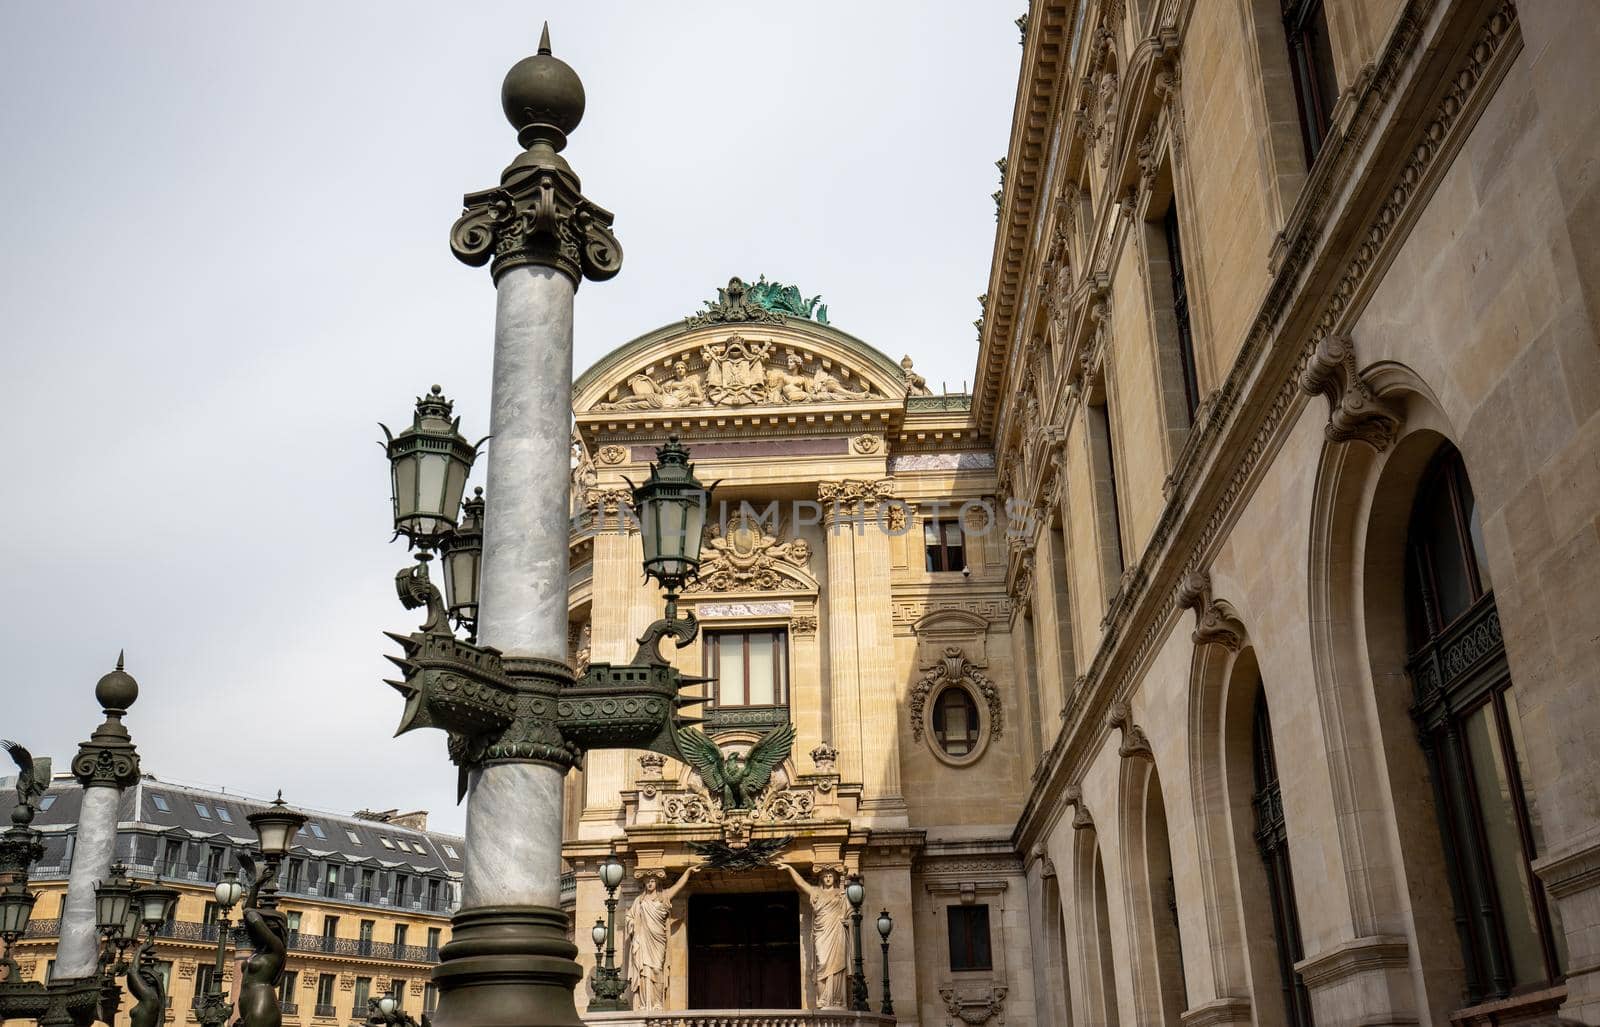 View at the back of the Paris Opera by reinerc